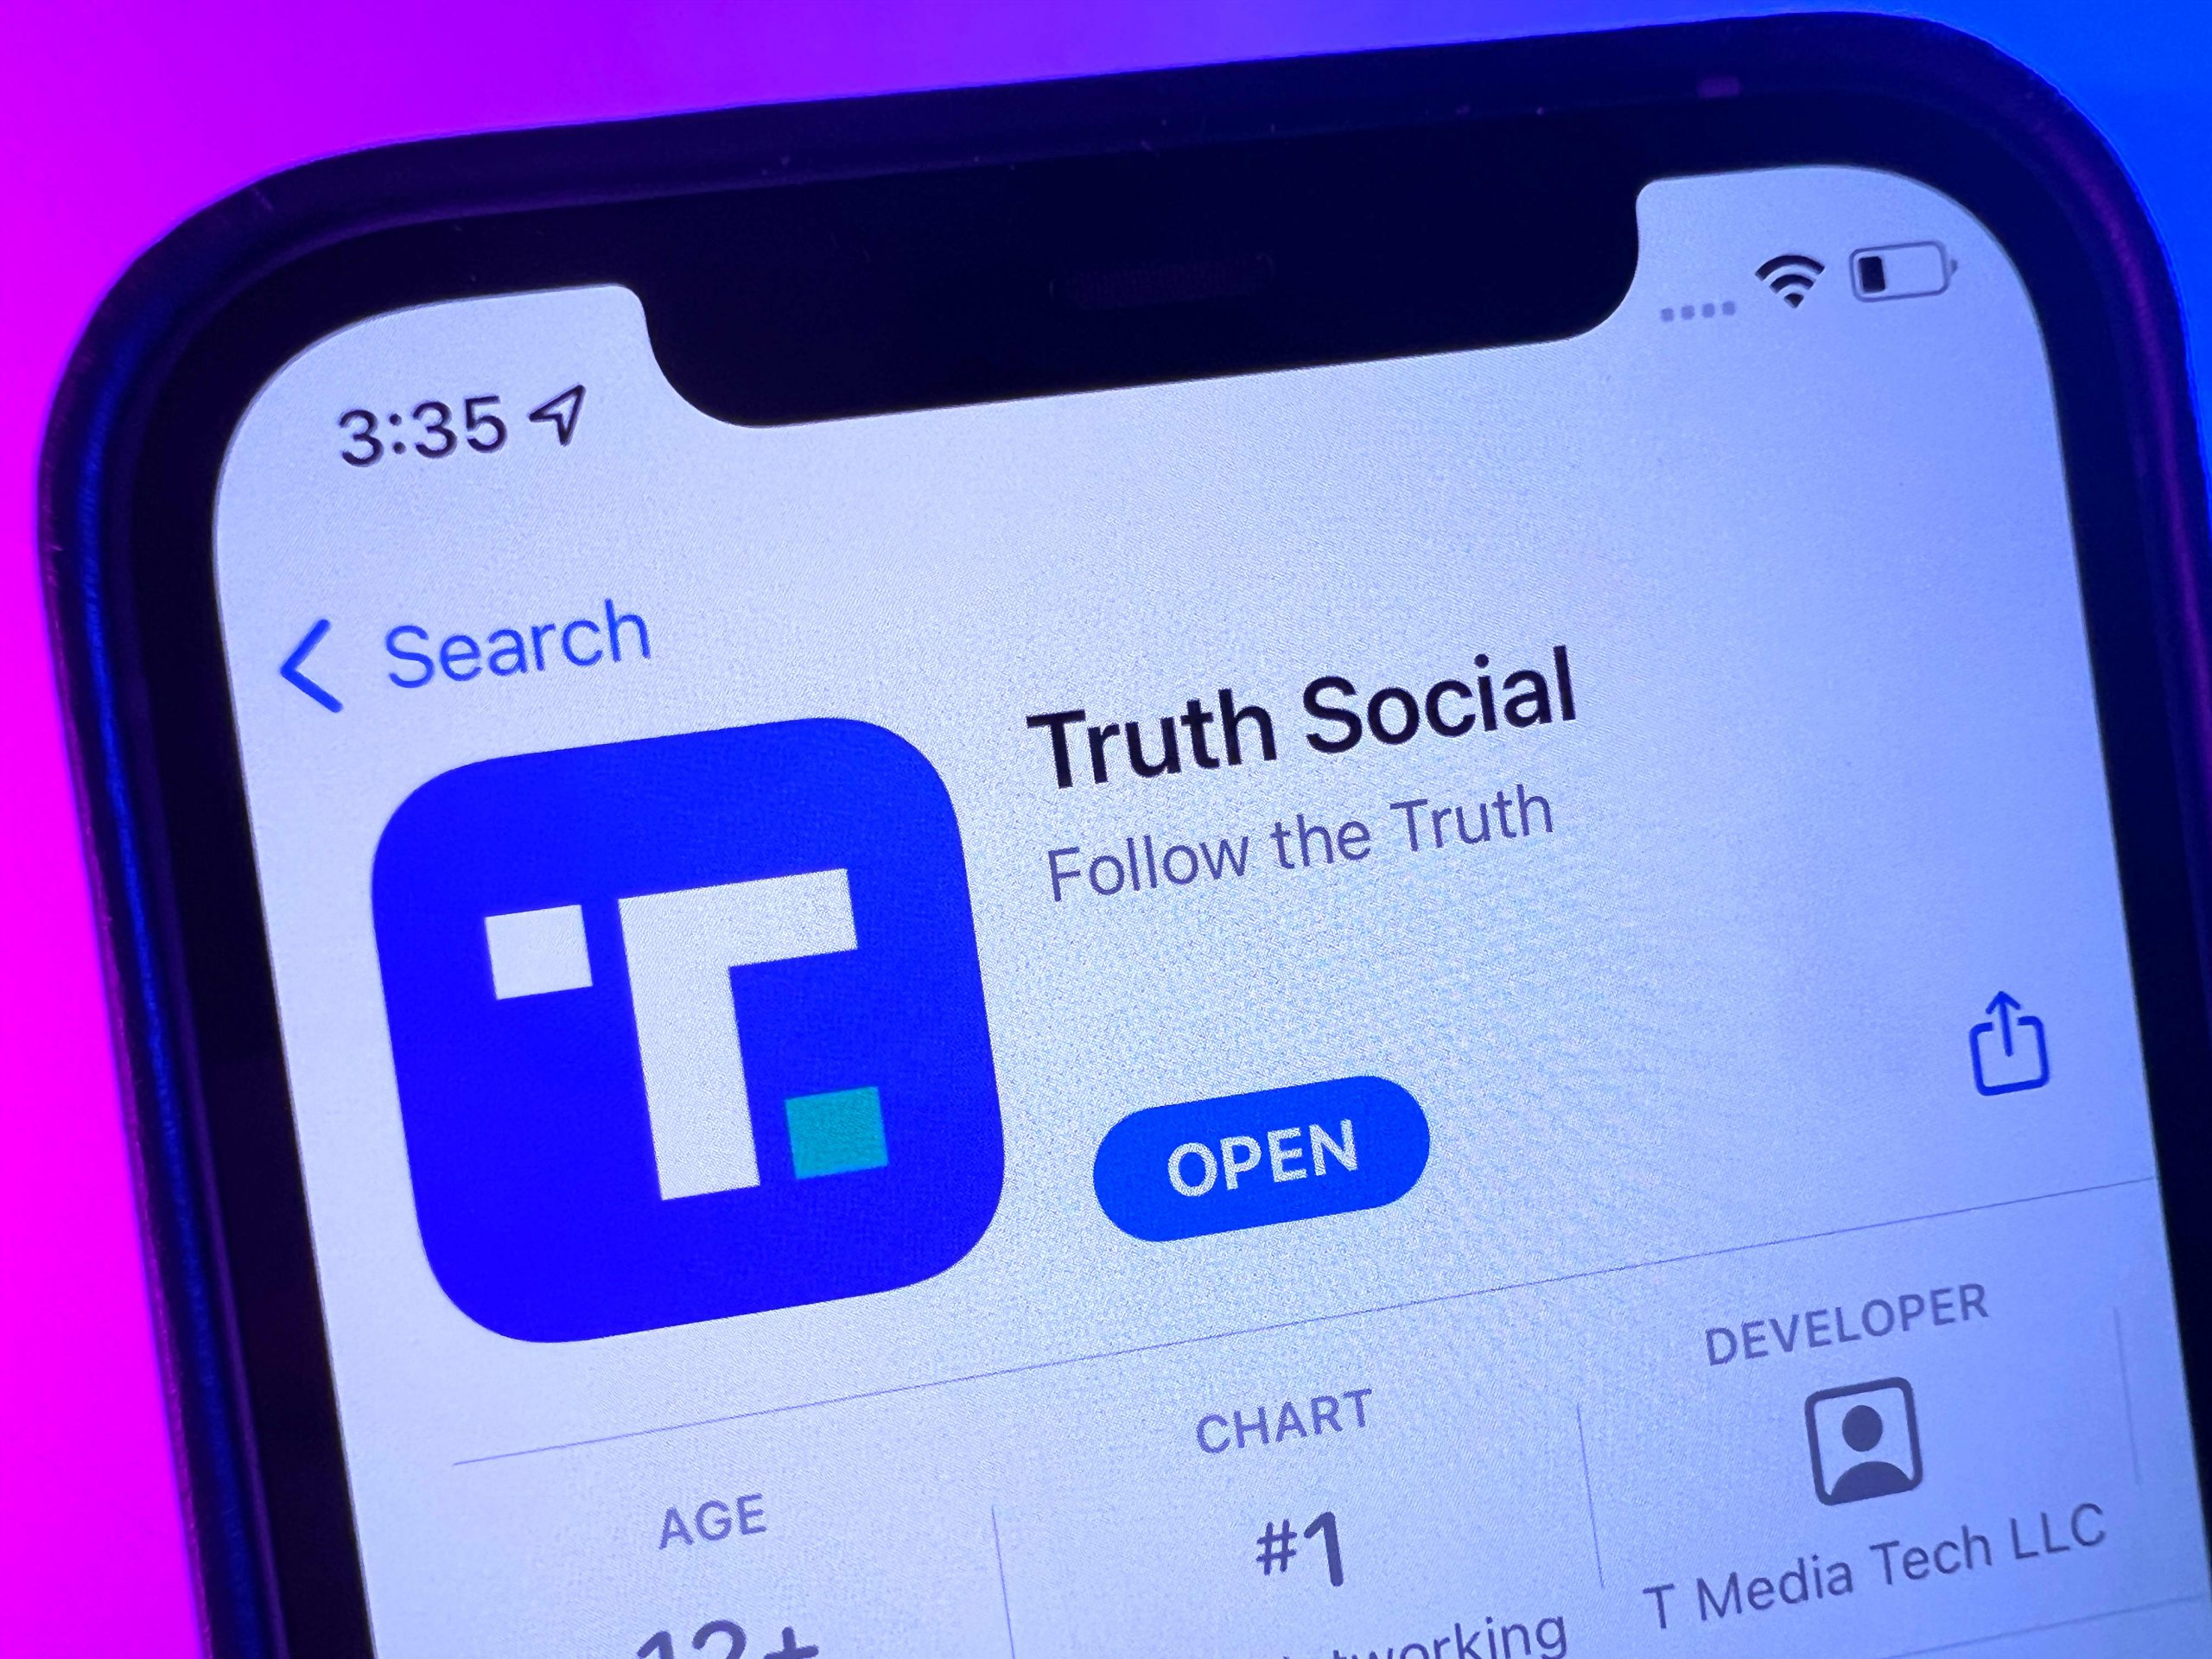 Google adds Trump’s Truth Social app to Play Store after it meets moderation requirements